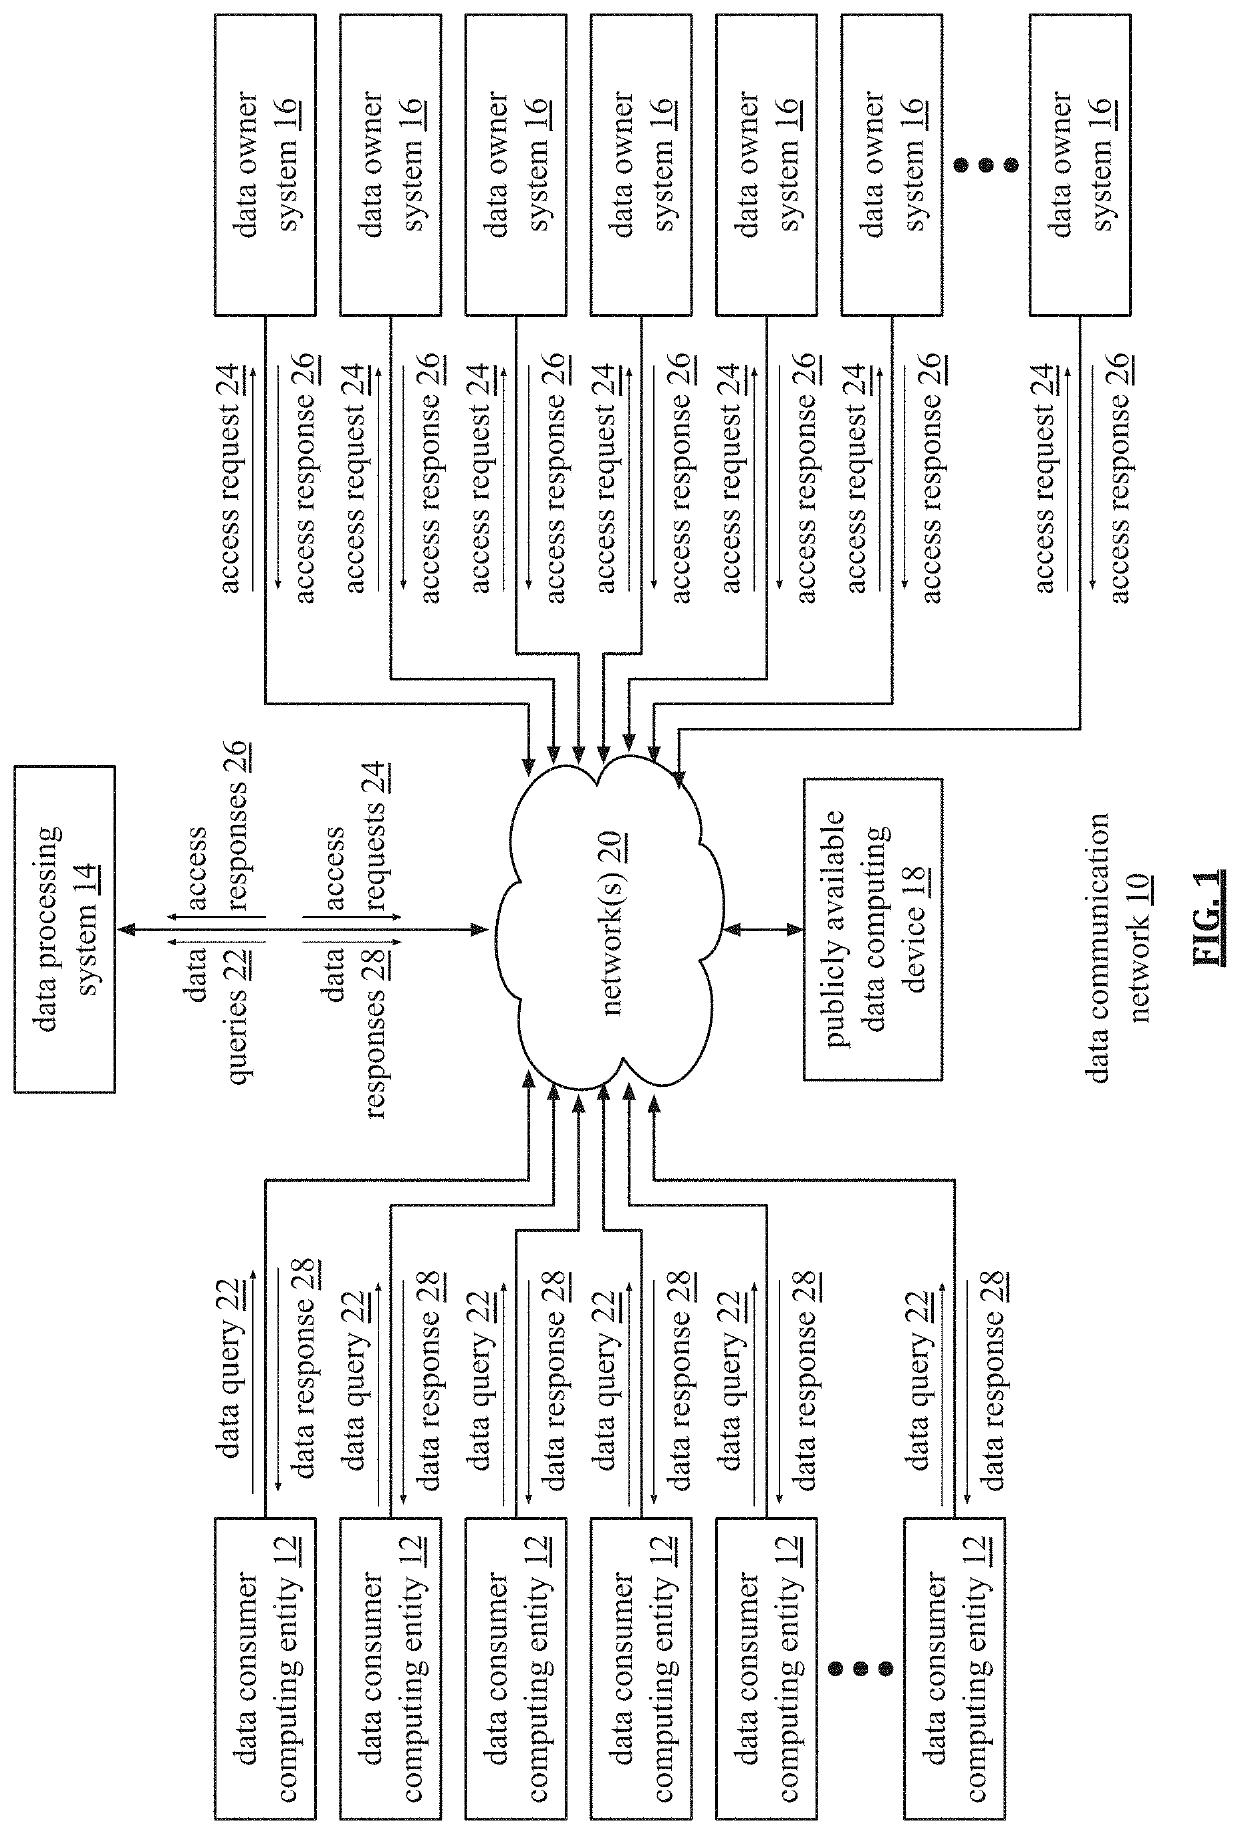 Securely processing shareable data in a data communication network